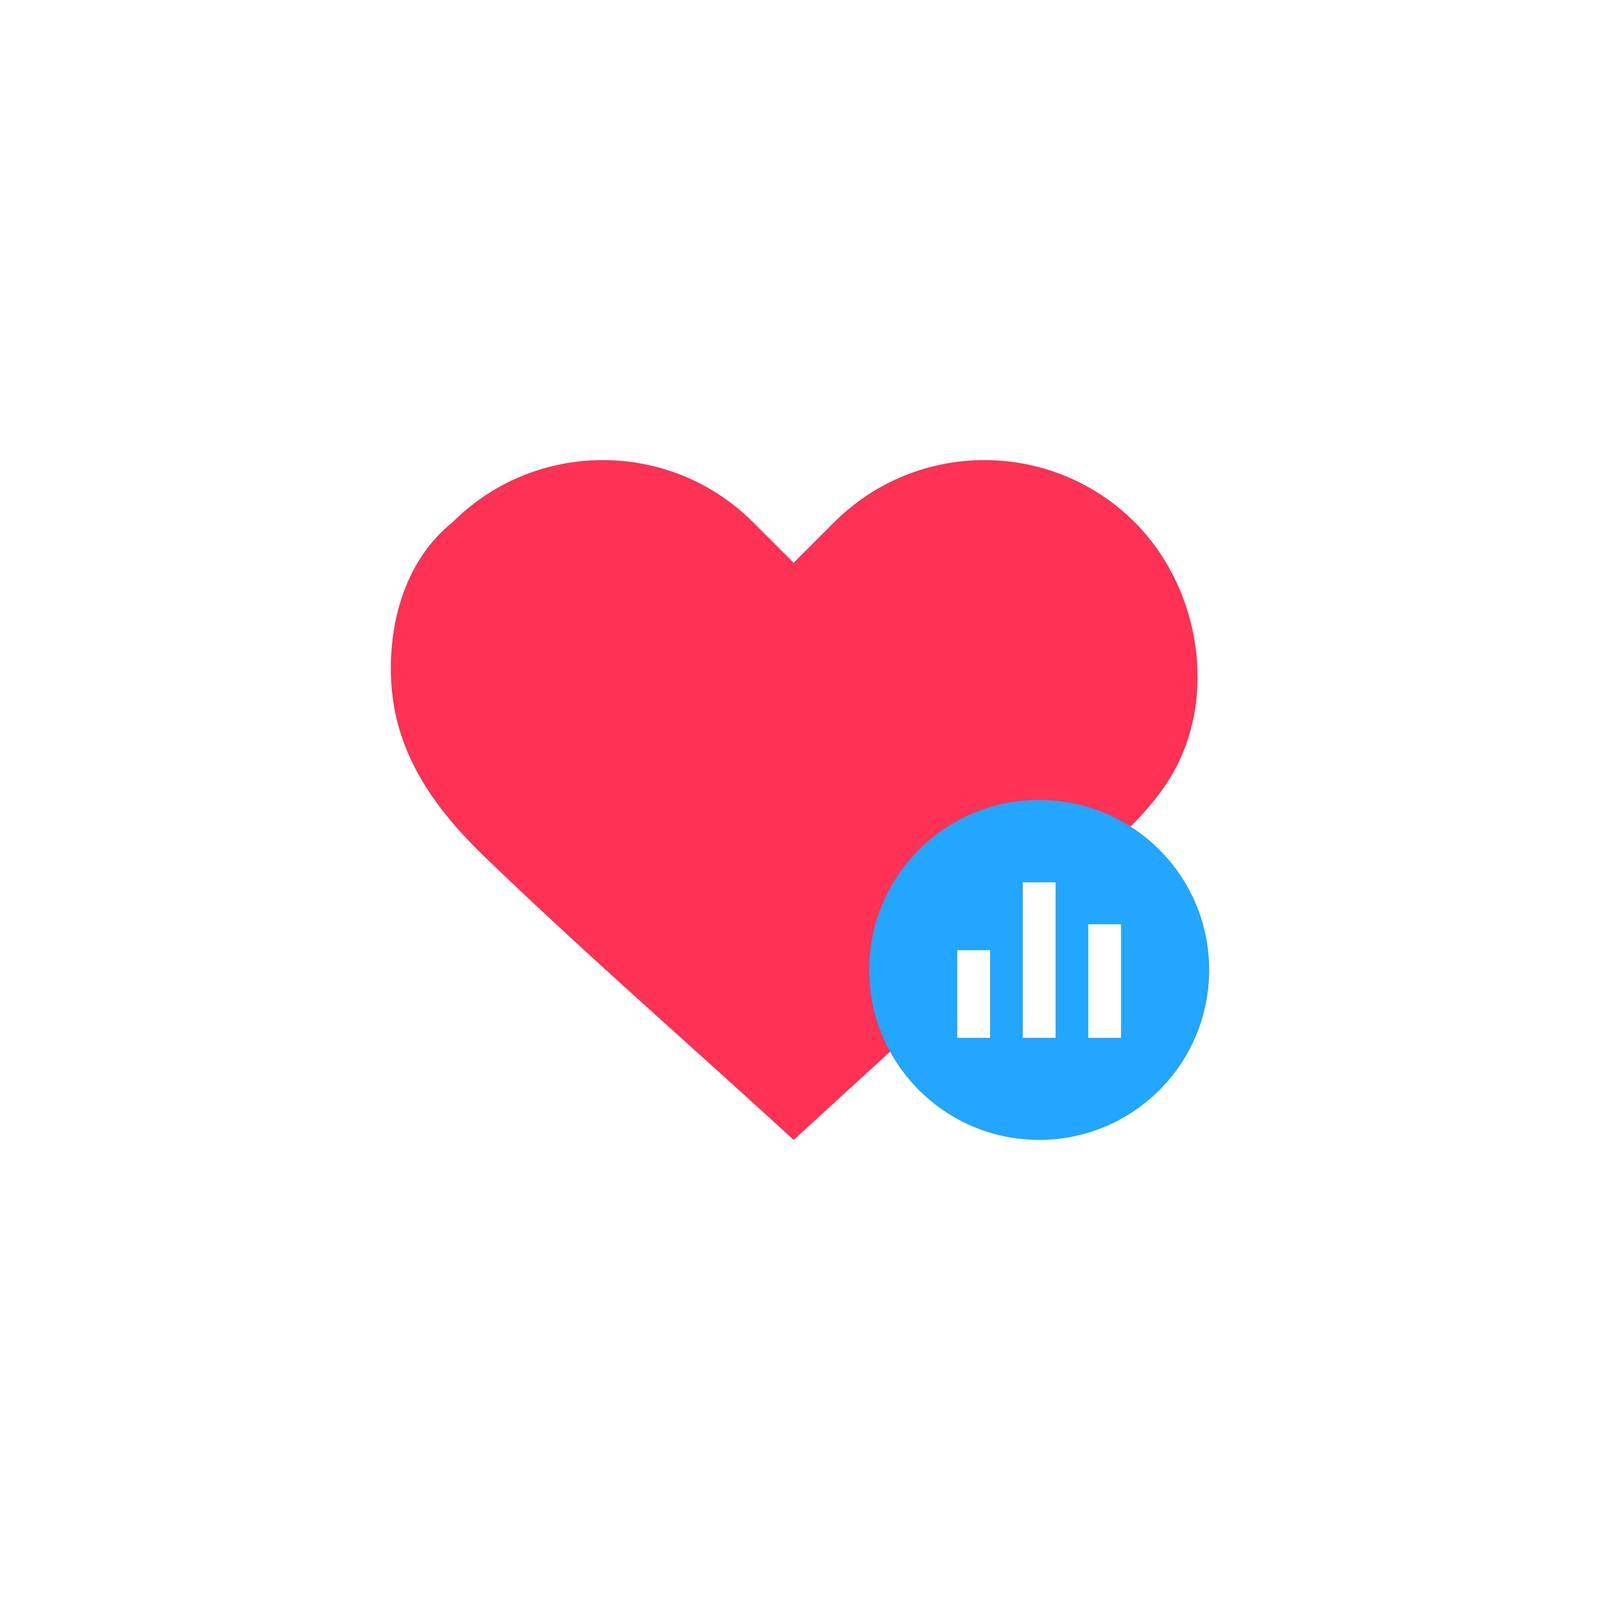 Heart stats icon. Heart tracking status symbol. Vector EPS 10 by TopRated